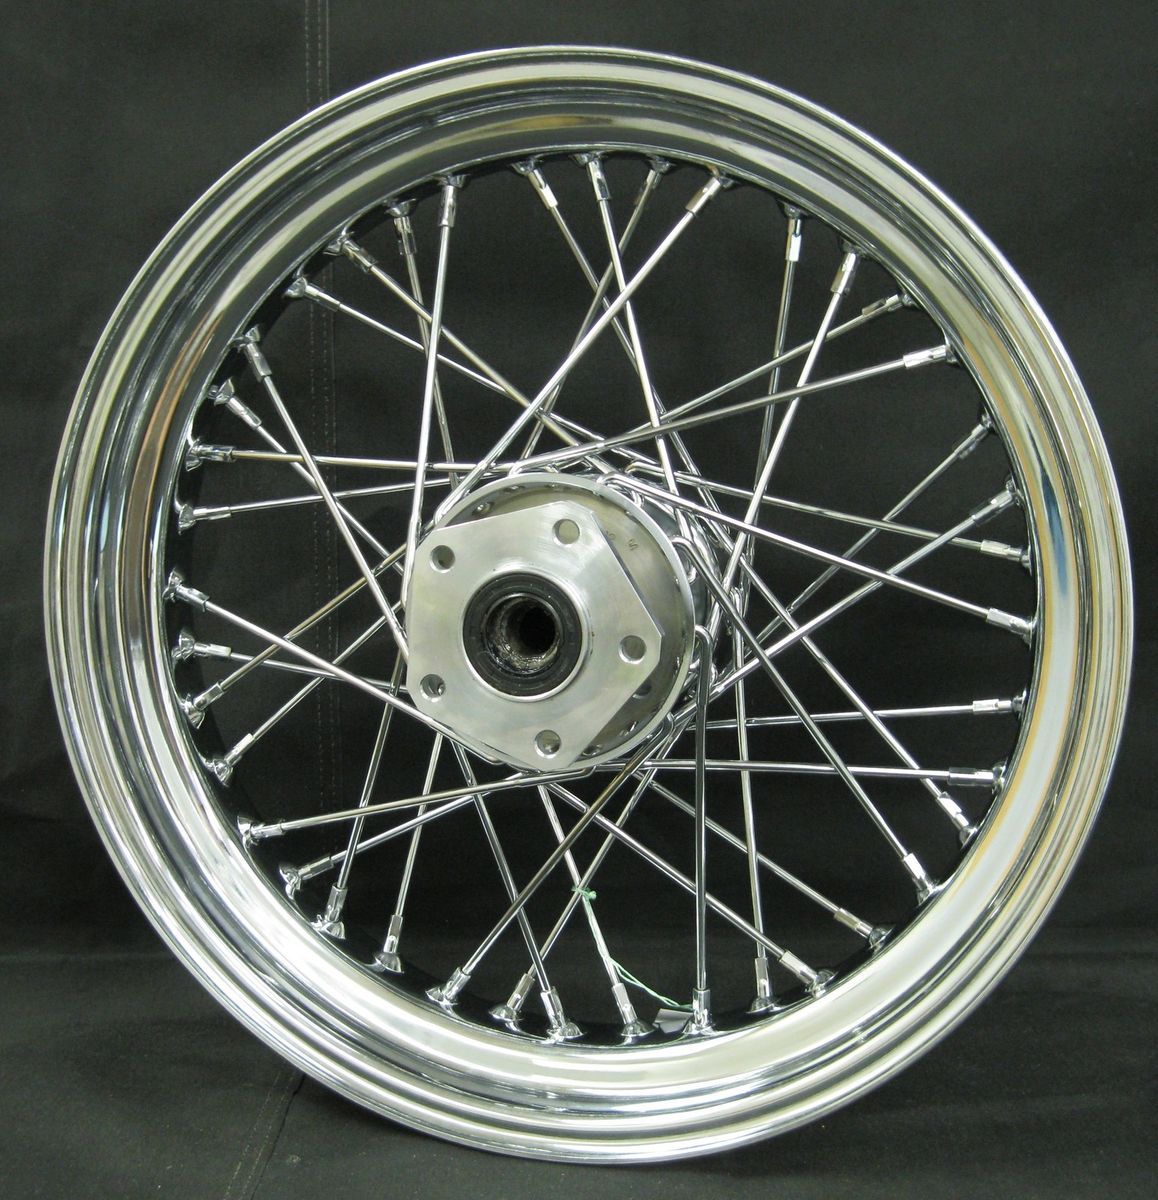 Chrome Ultima 40 Spoke 16x3 5 Front Wheel for Harley Softail 84 99 and